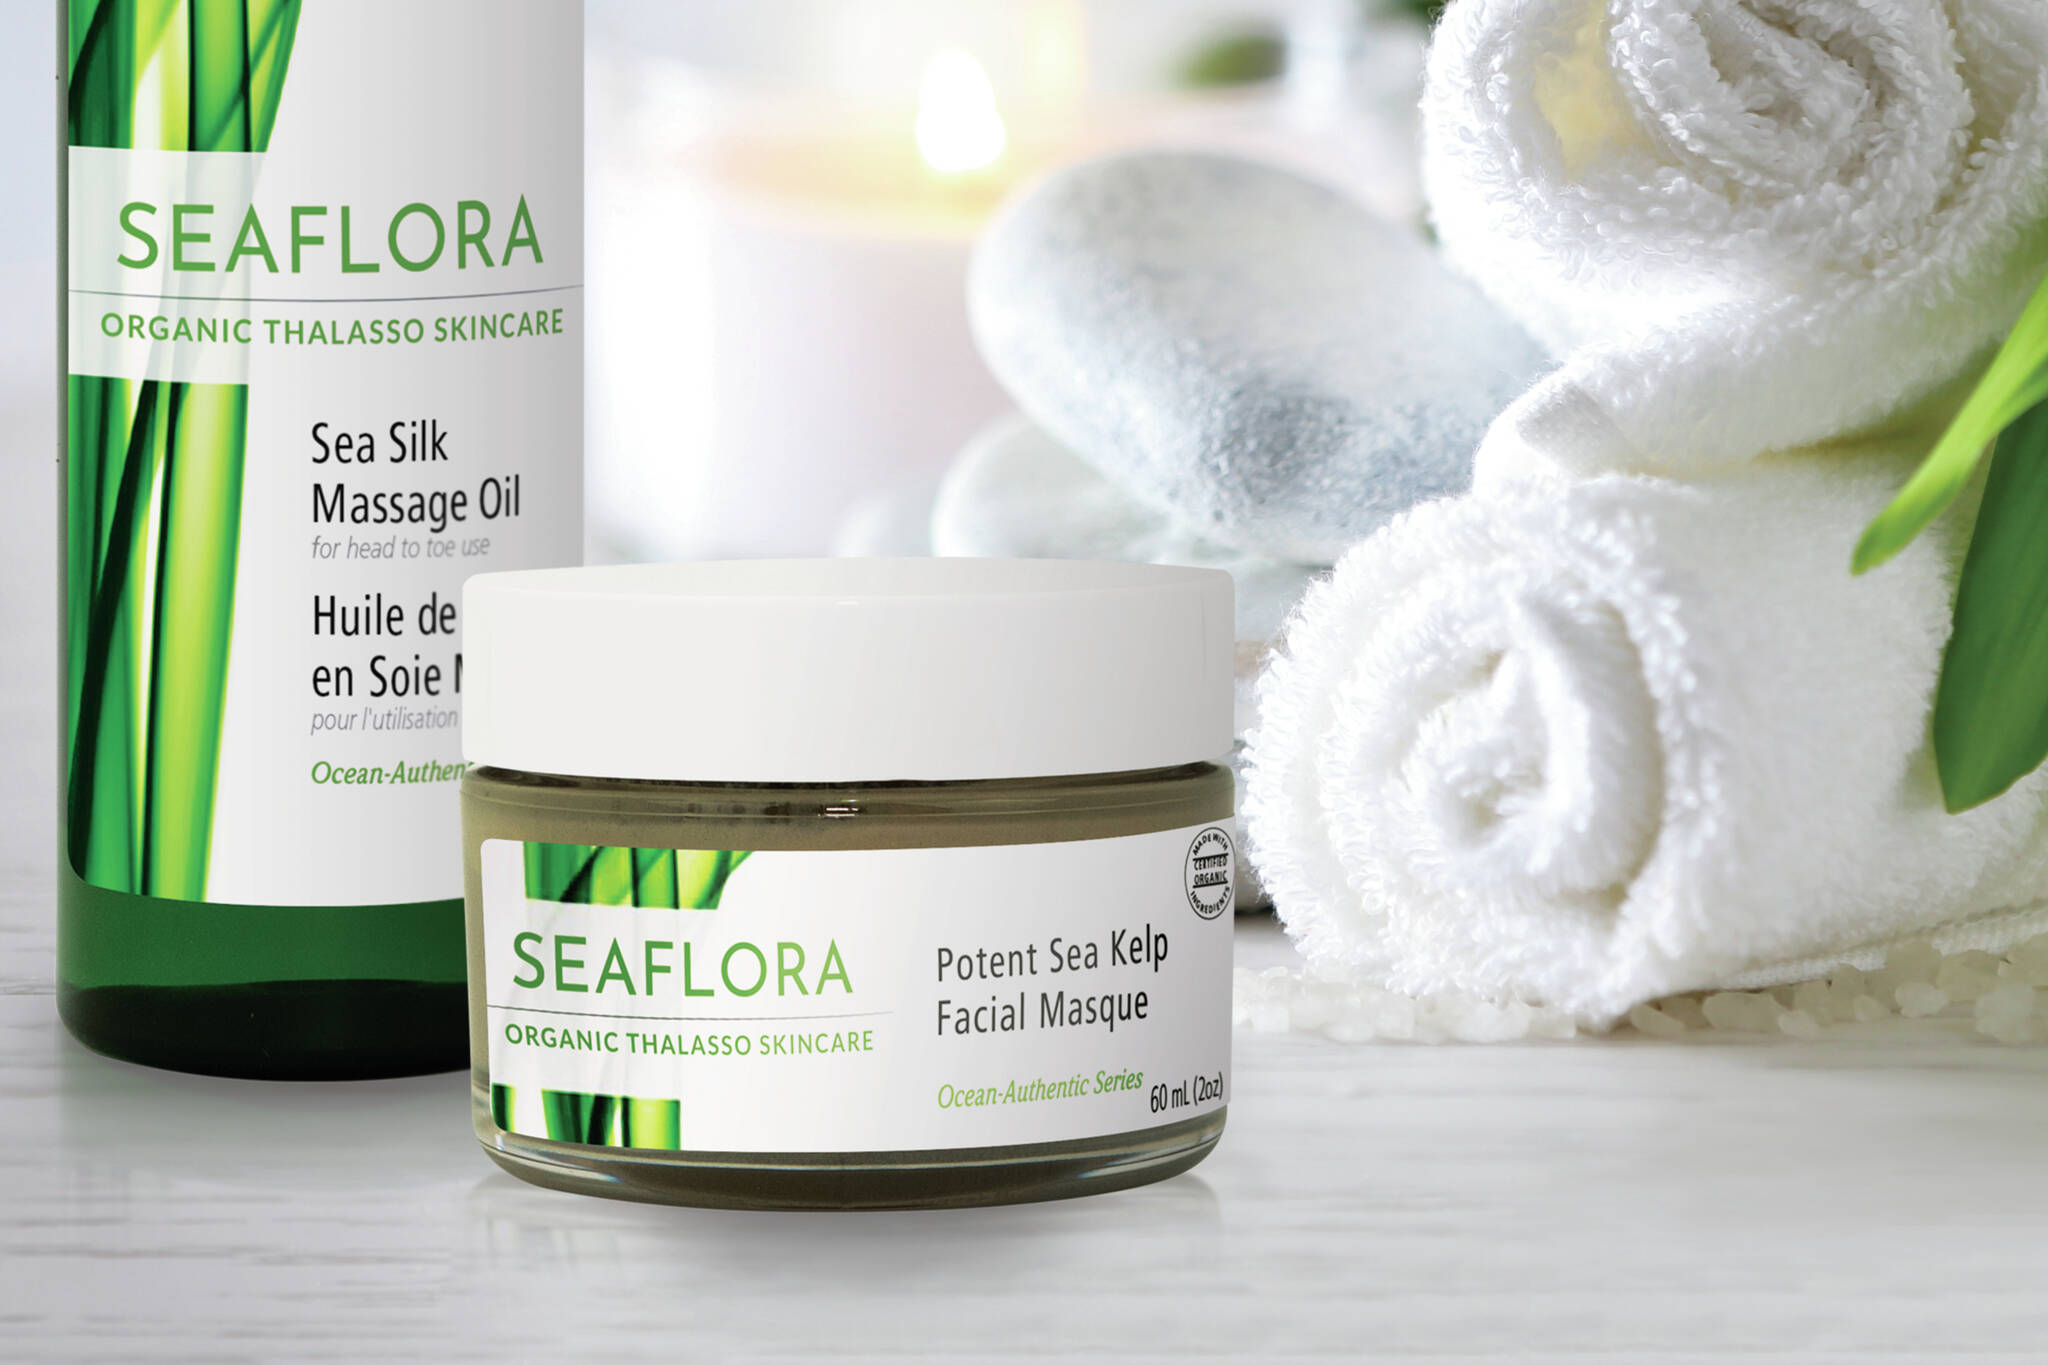 SeaFlora Skincare, located in the heart of the Sooke village, creates locally sourced skin care products with a sea-to-skin approach. Courtesy Sooke Tourism Association